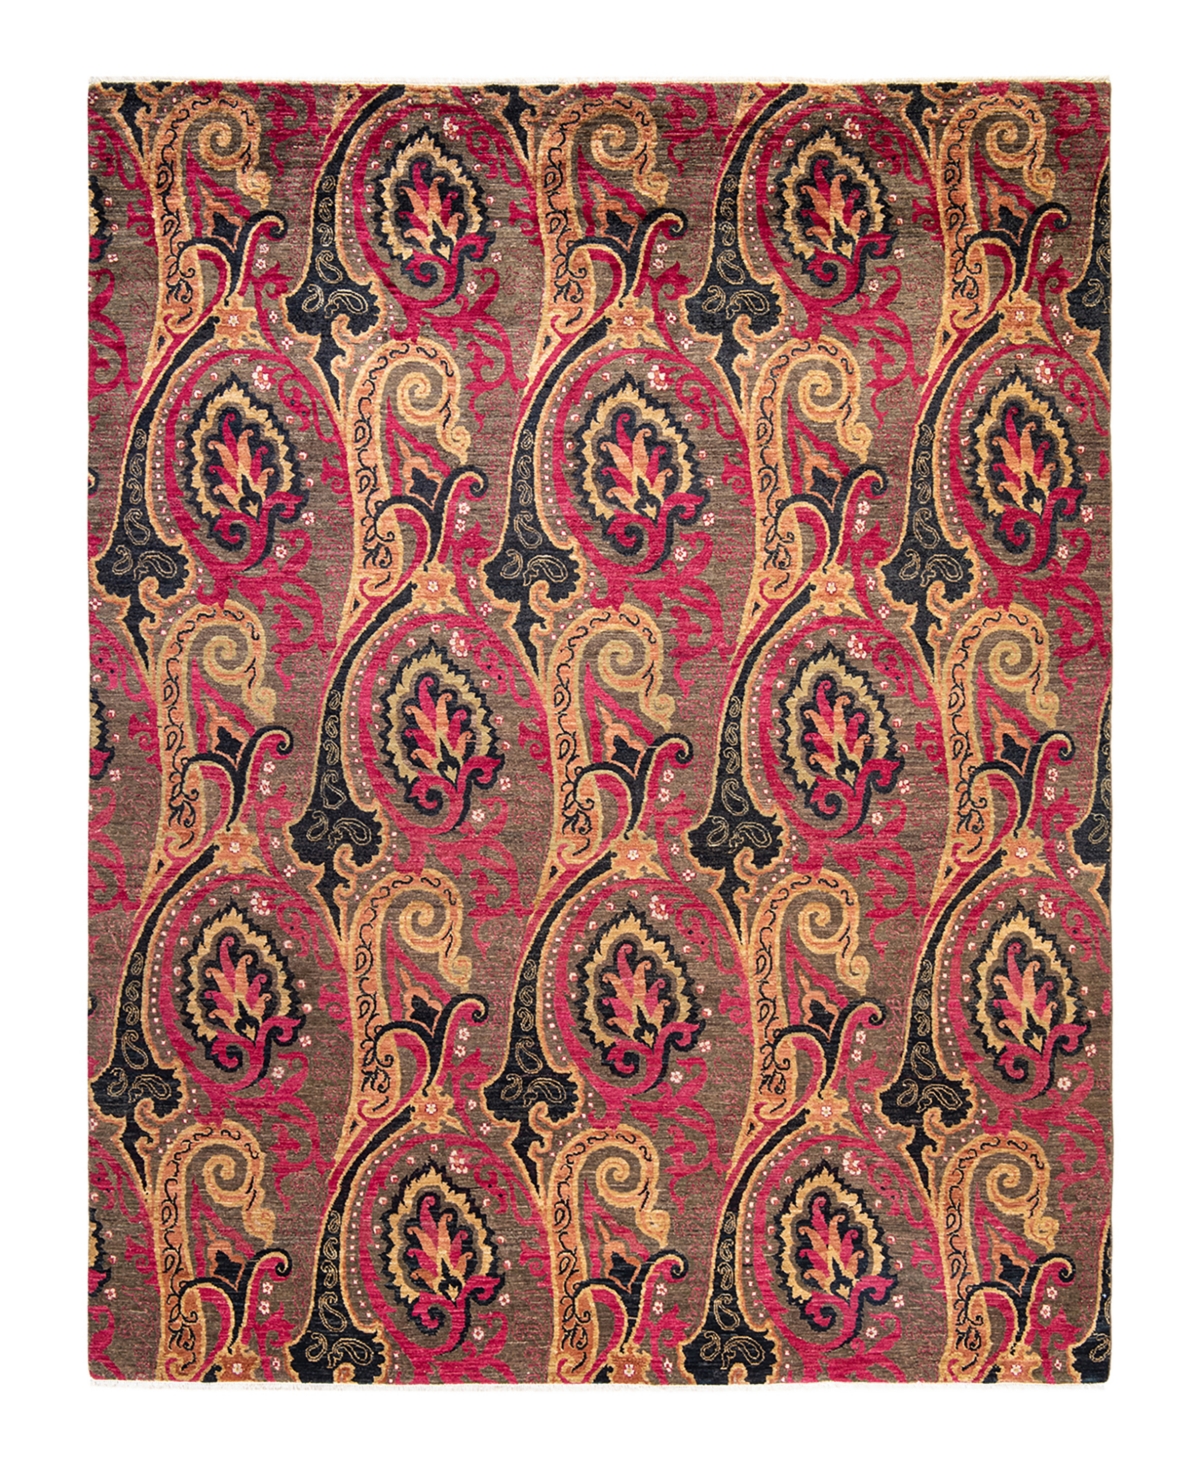 Adorn Hand Woven Rugs Suzani M1740 8' X 10'4" Area Rug In Pink